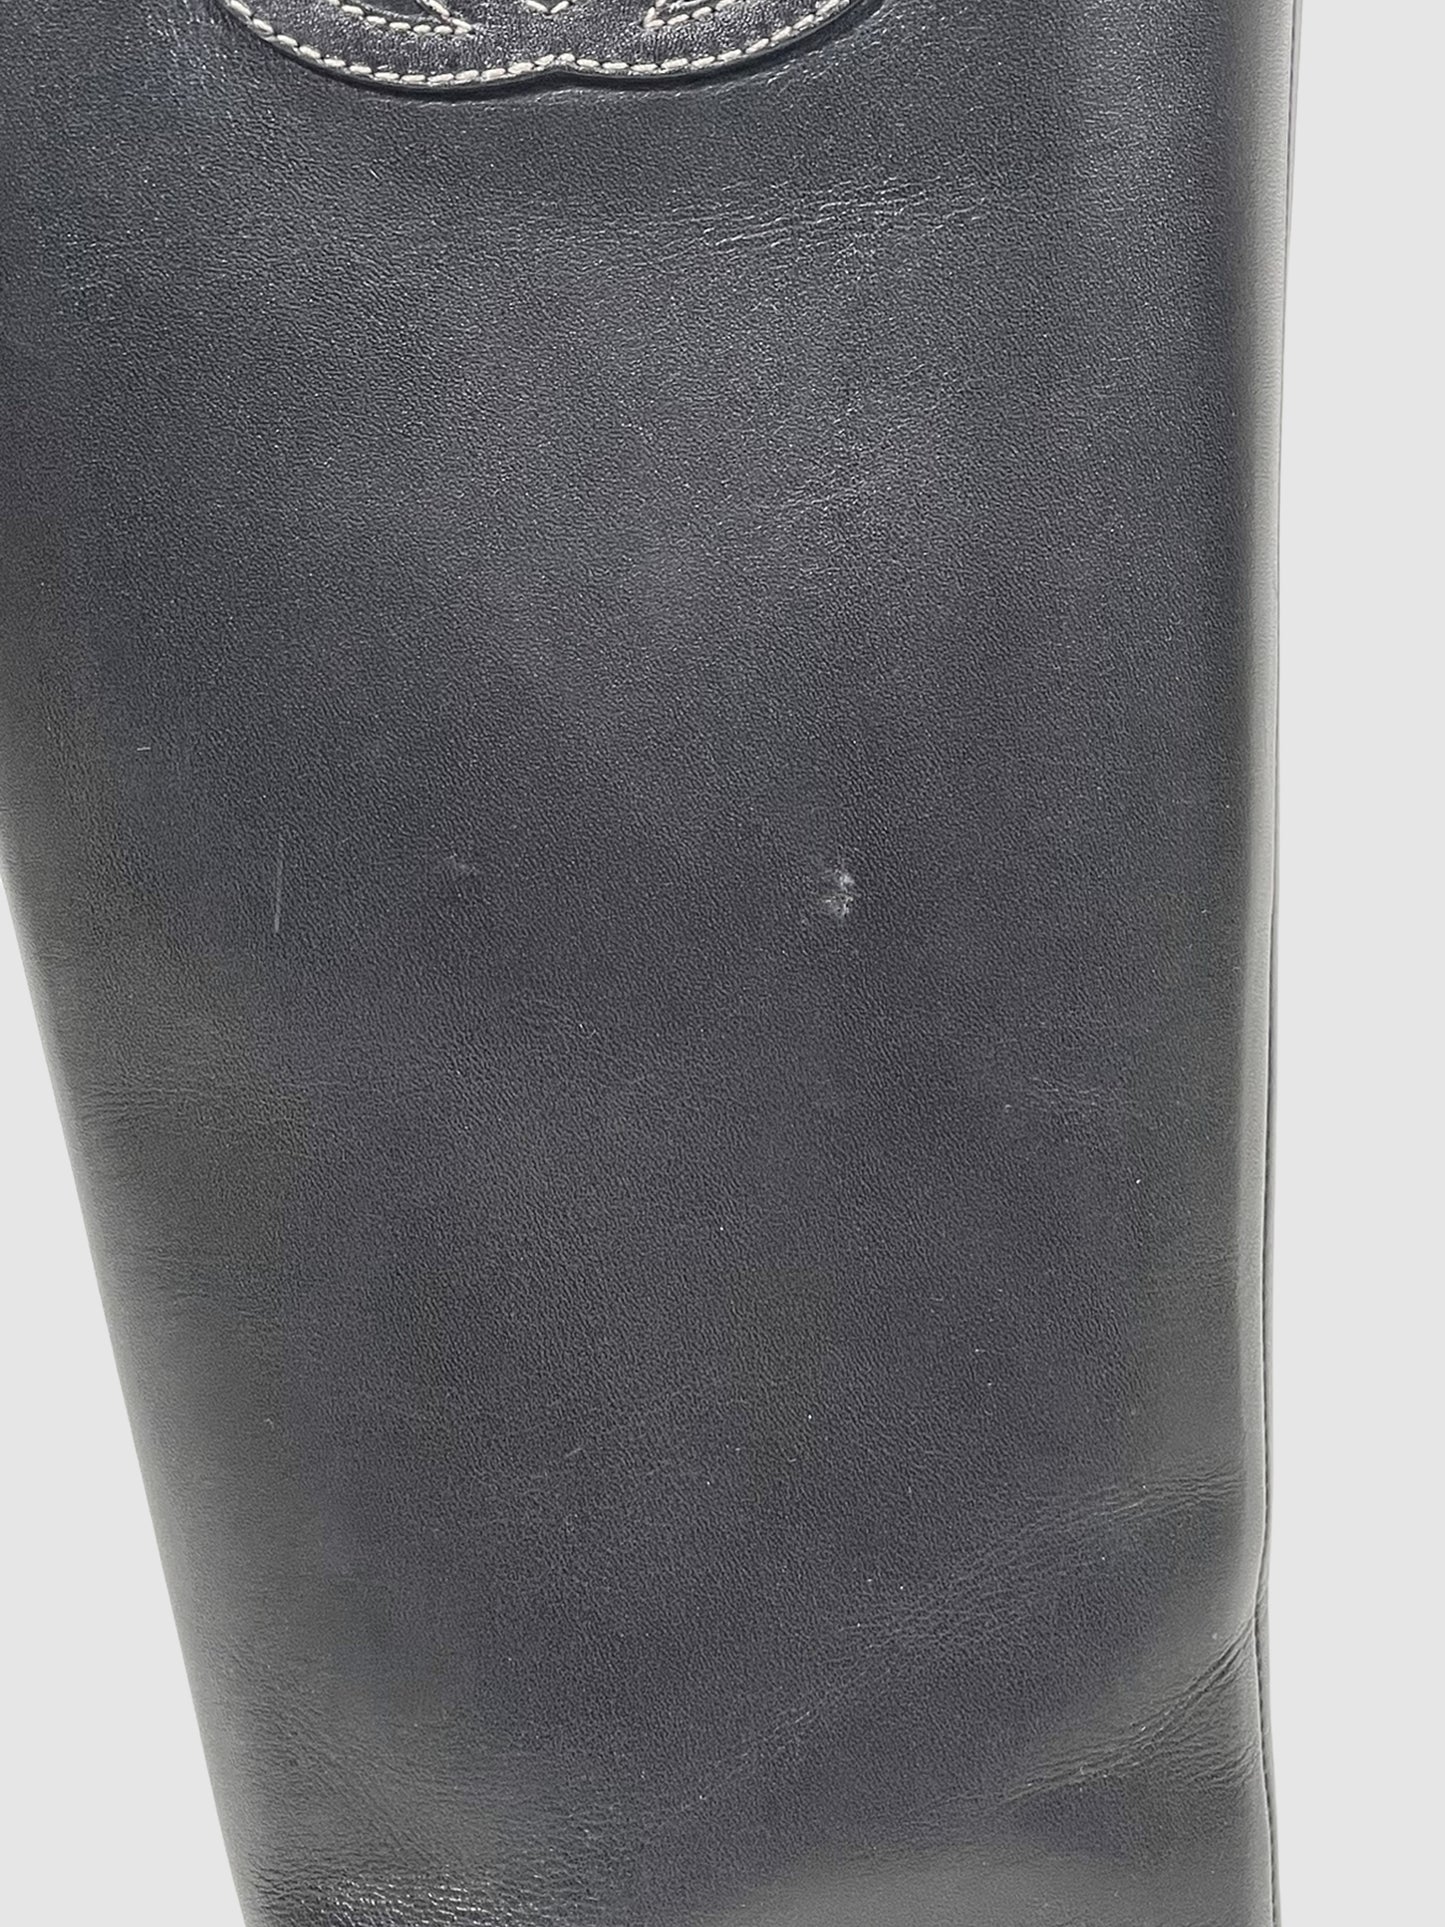 Gucci Leather Knee-High Boots - Size 6.5